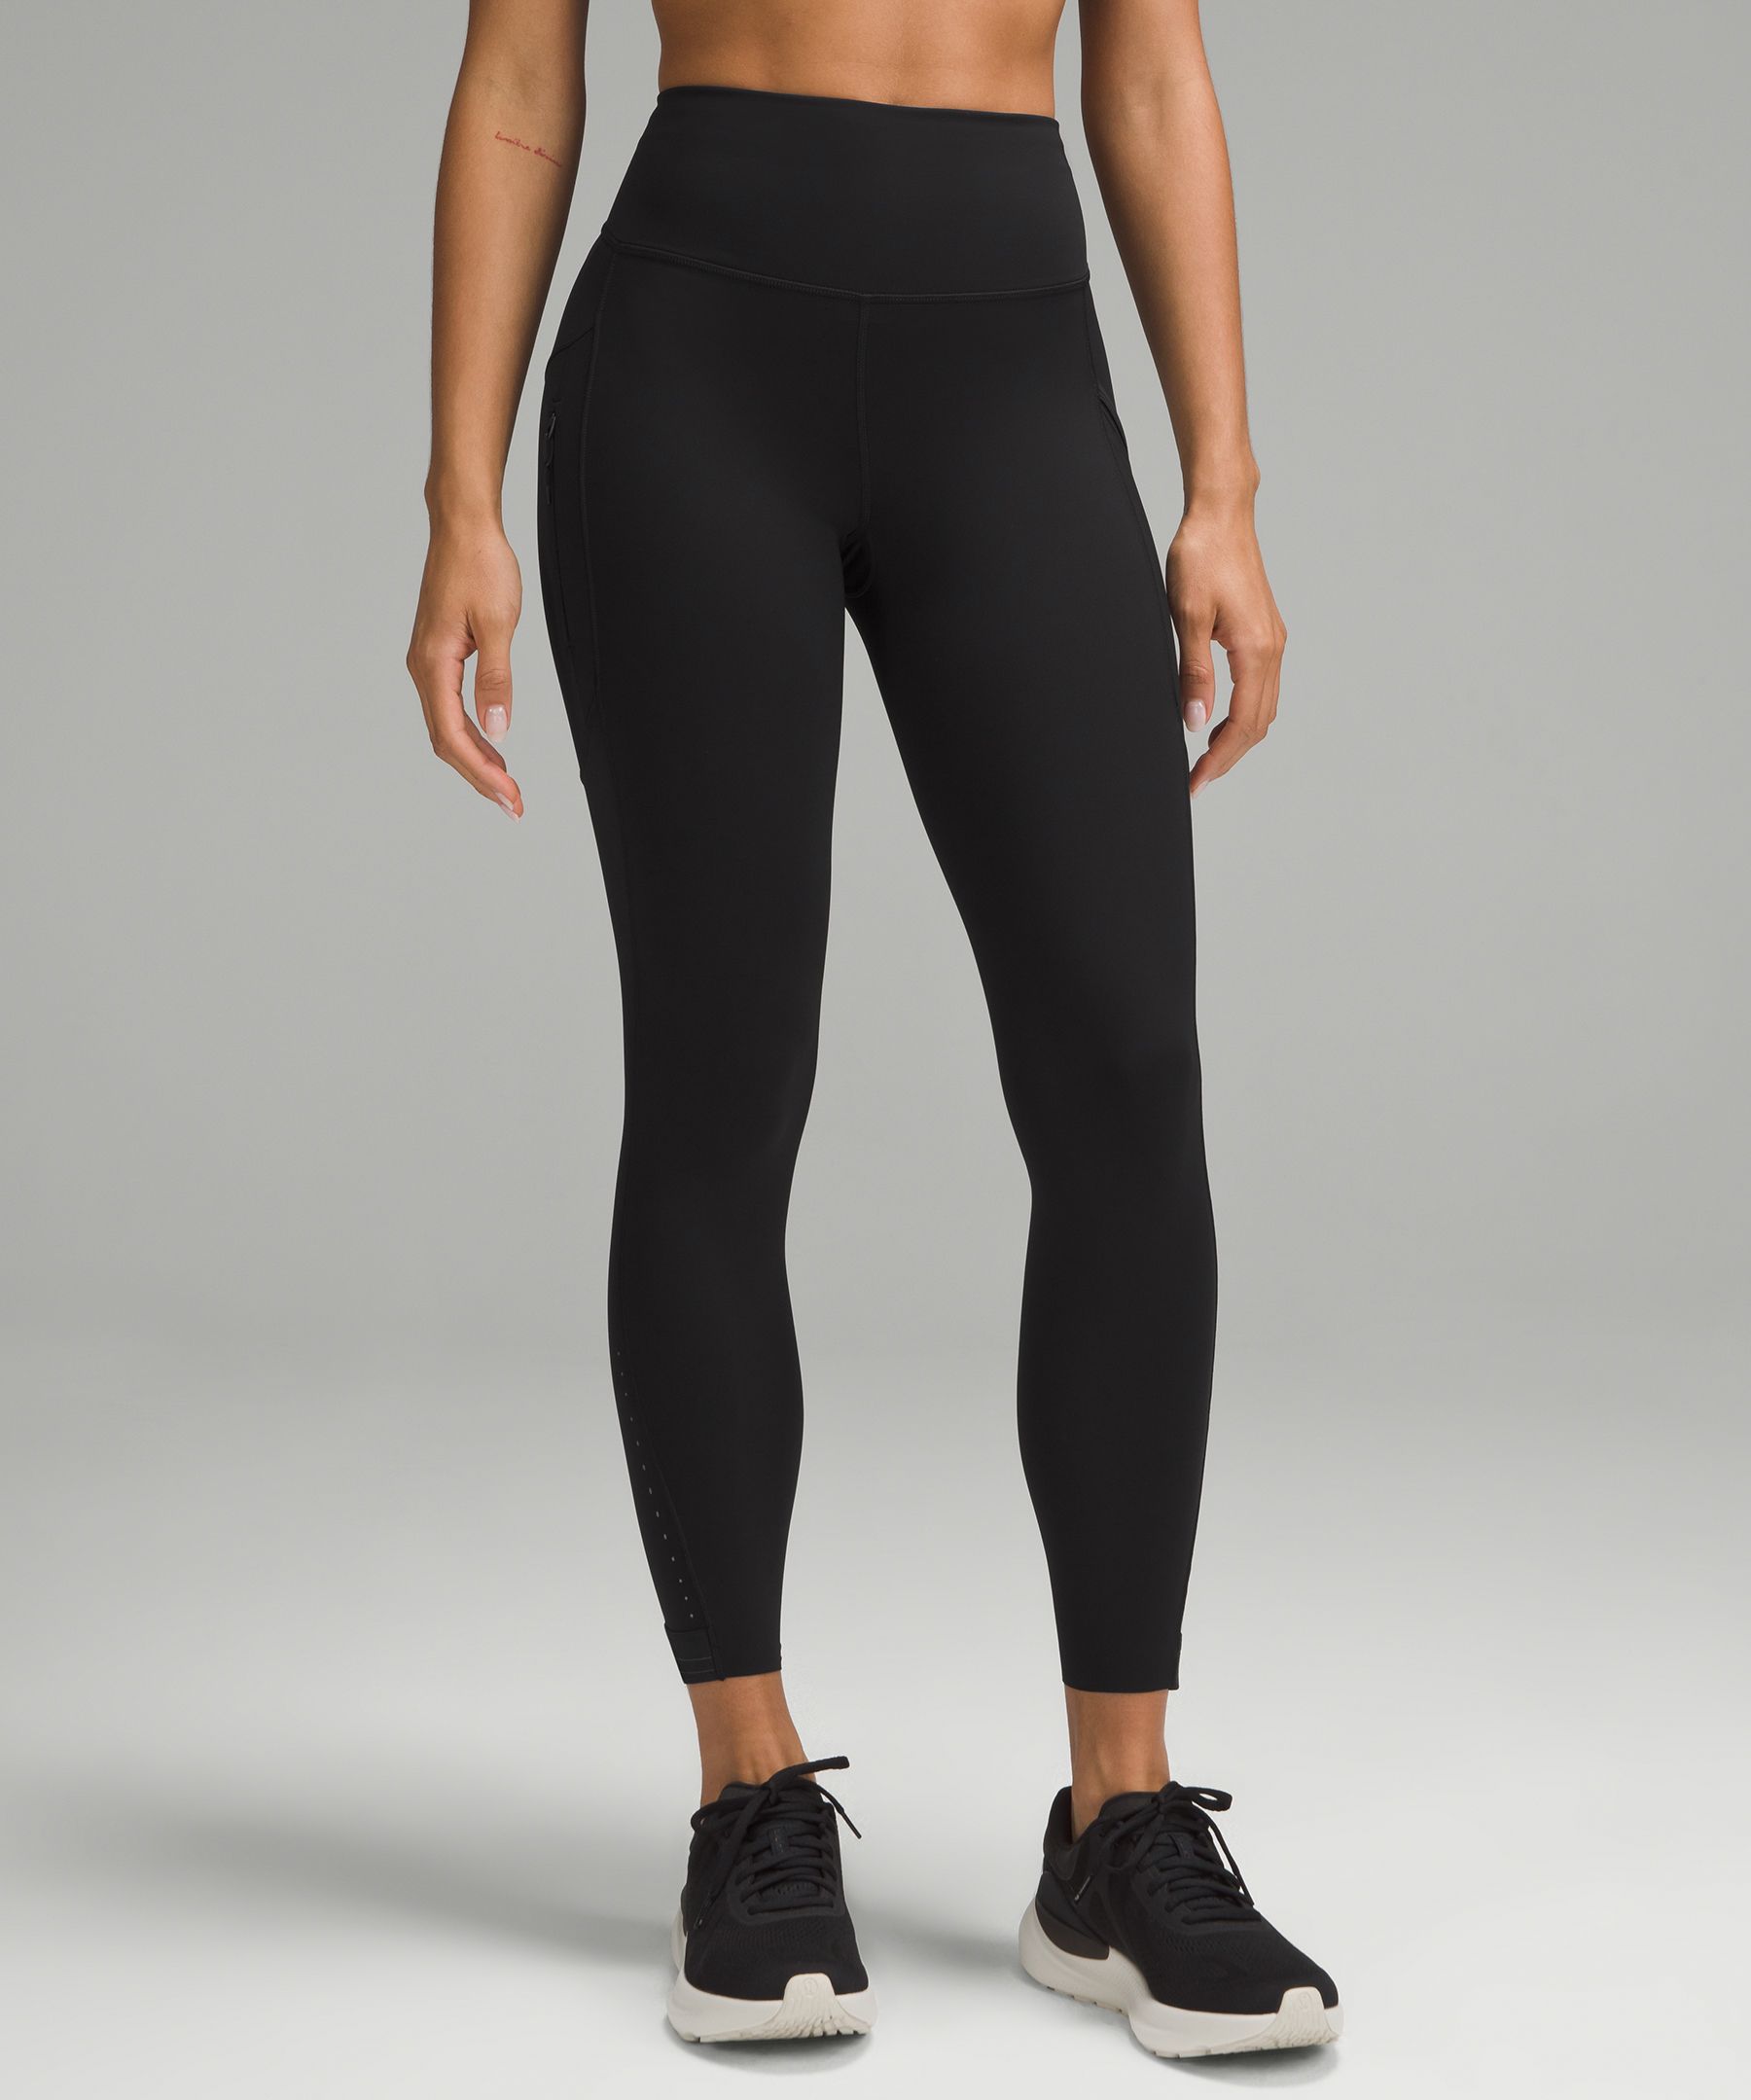 Fast and Free High-Rise Tight 25" 3 Pockets *Glow | Women's Leggings/Tights